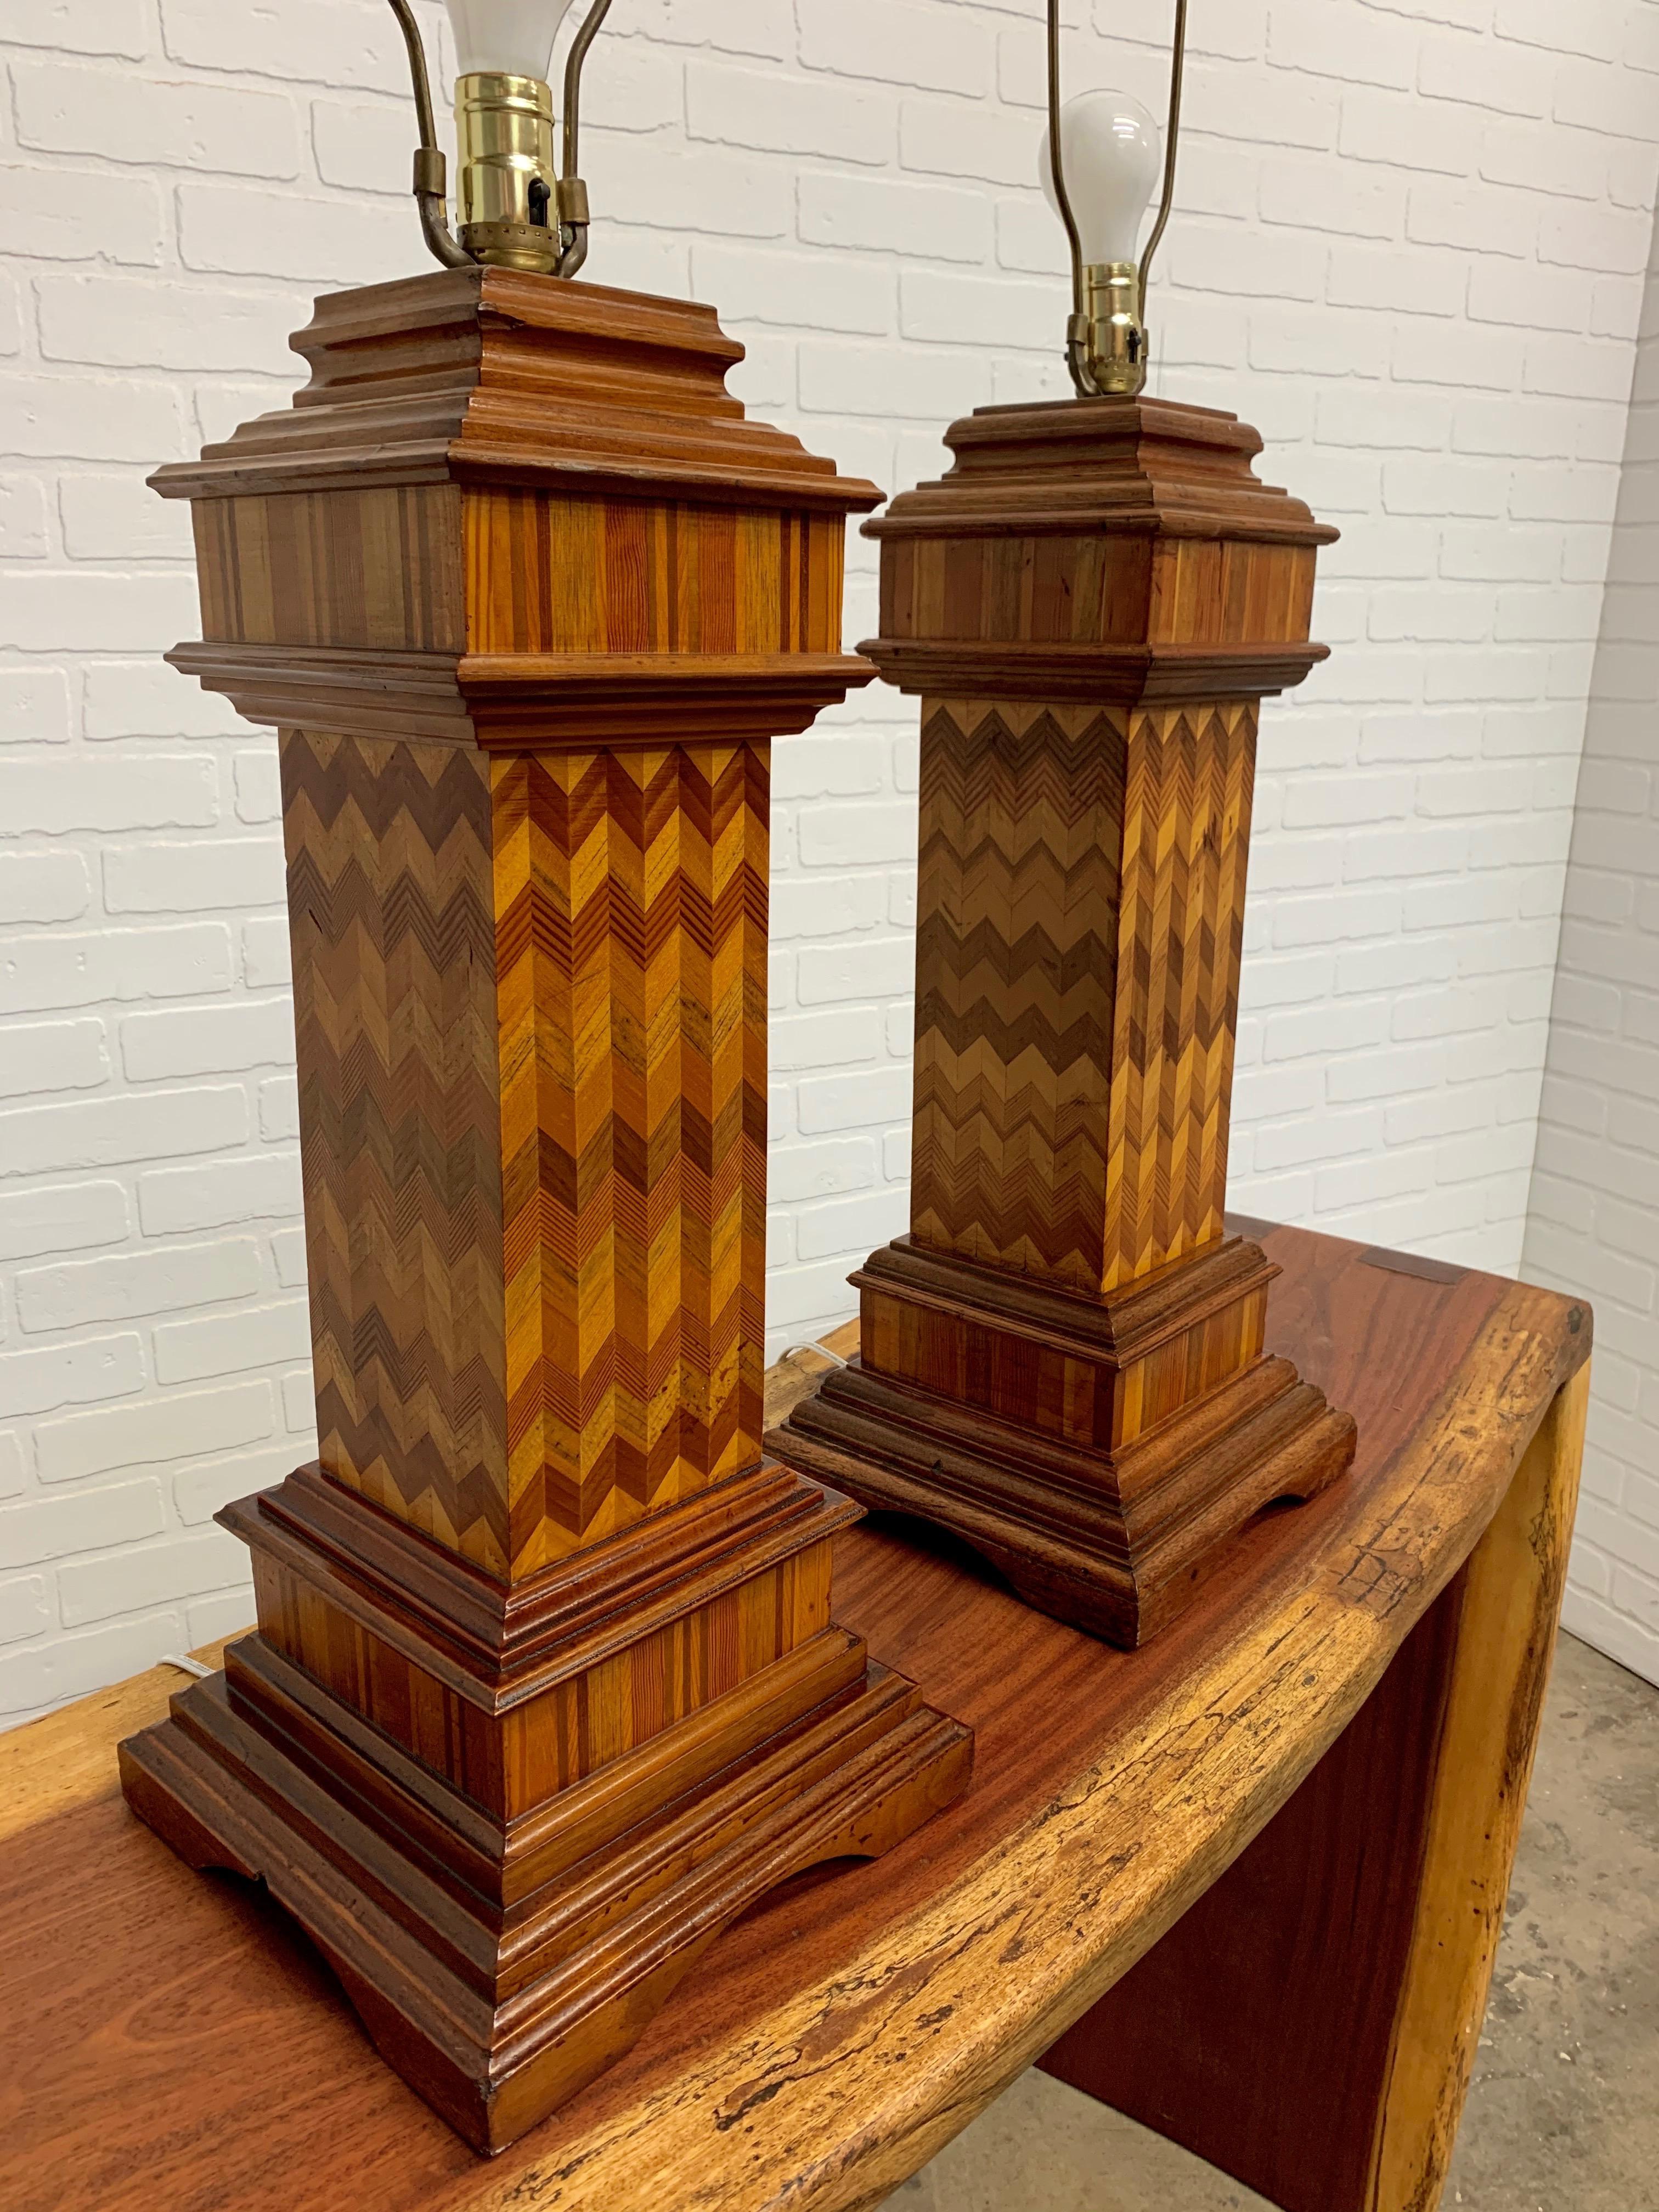 These are an older conversion with zig zag marquetry inlaid on these large wooden lamps. Shades are not included
The height measurement is to the top of the socket 26.5/8